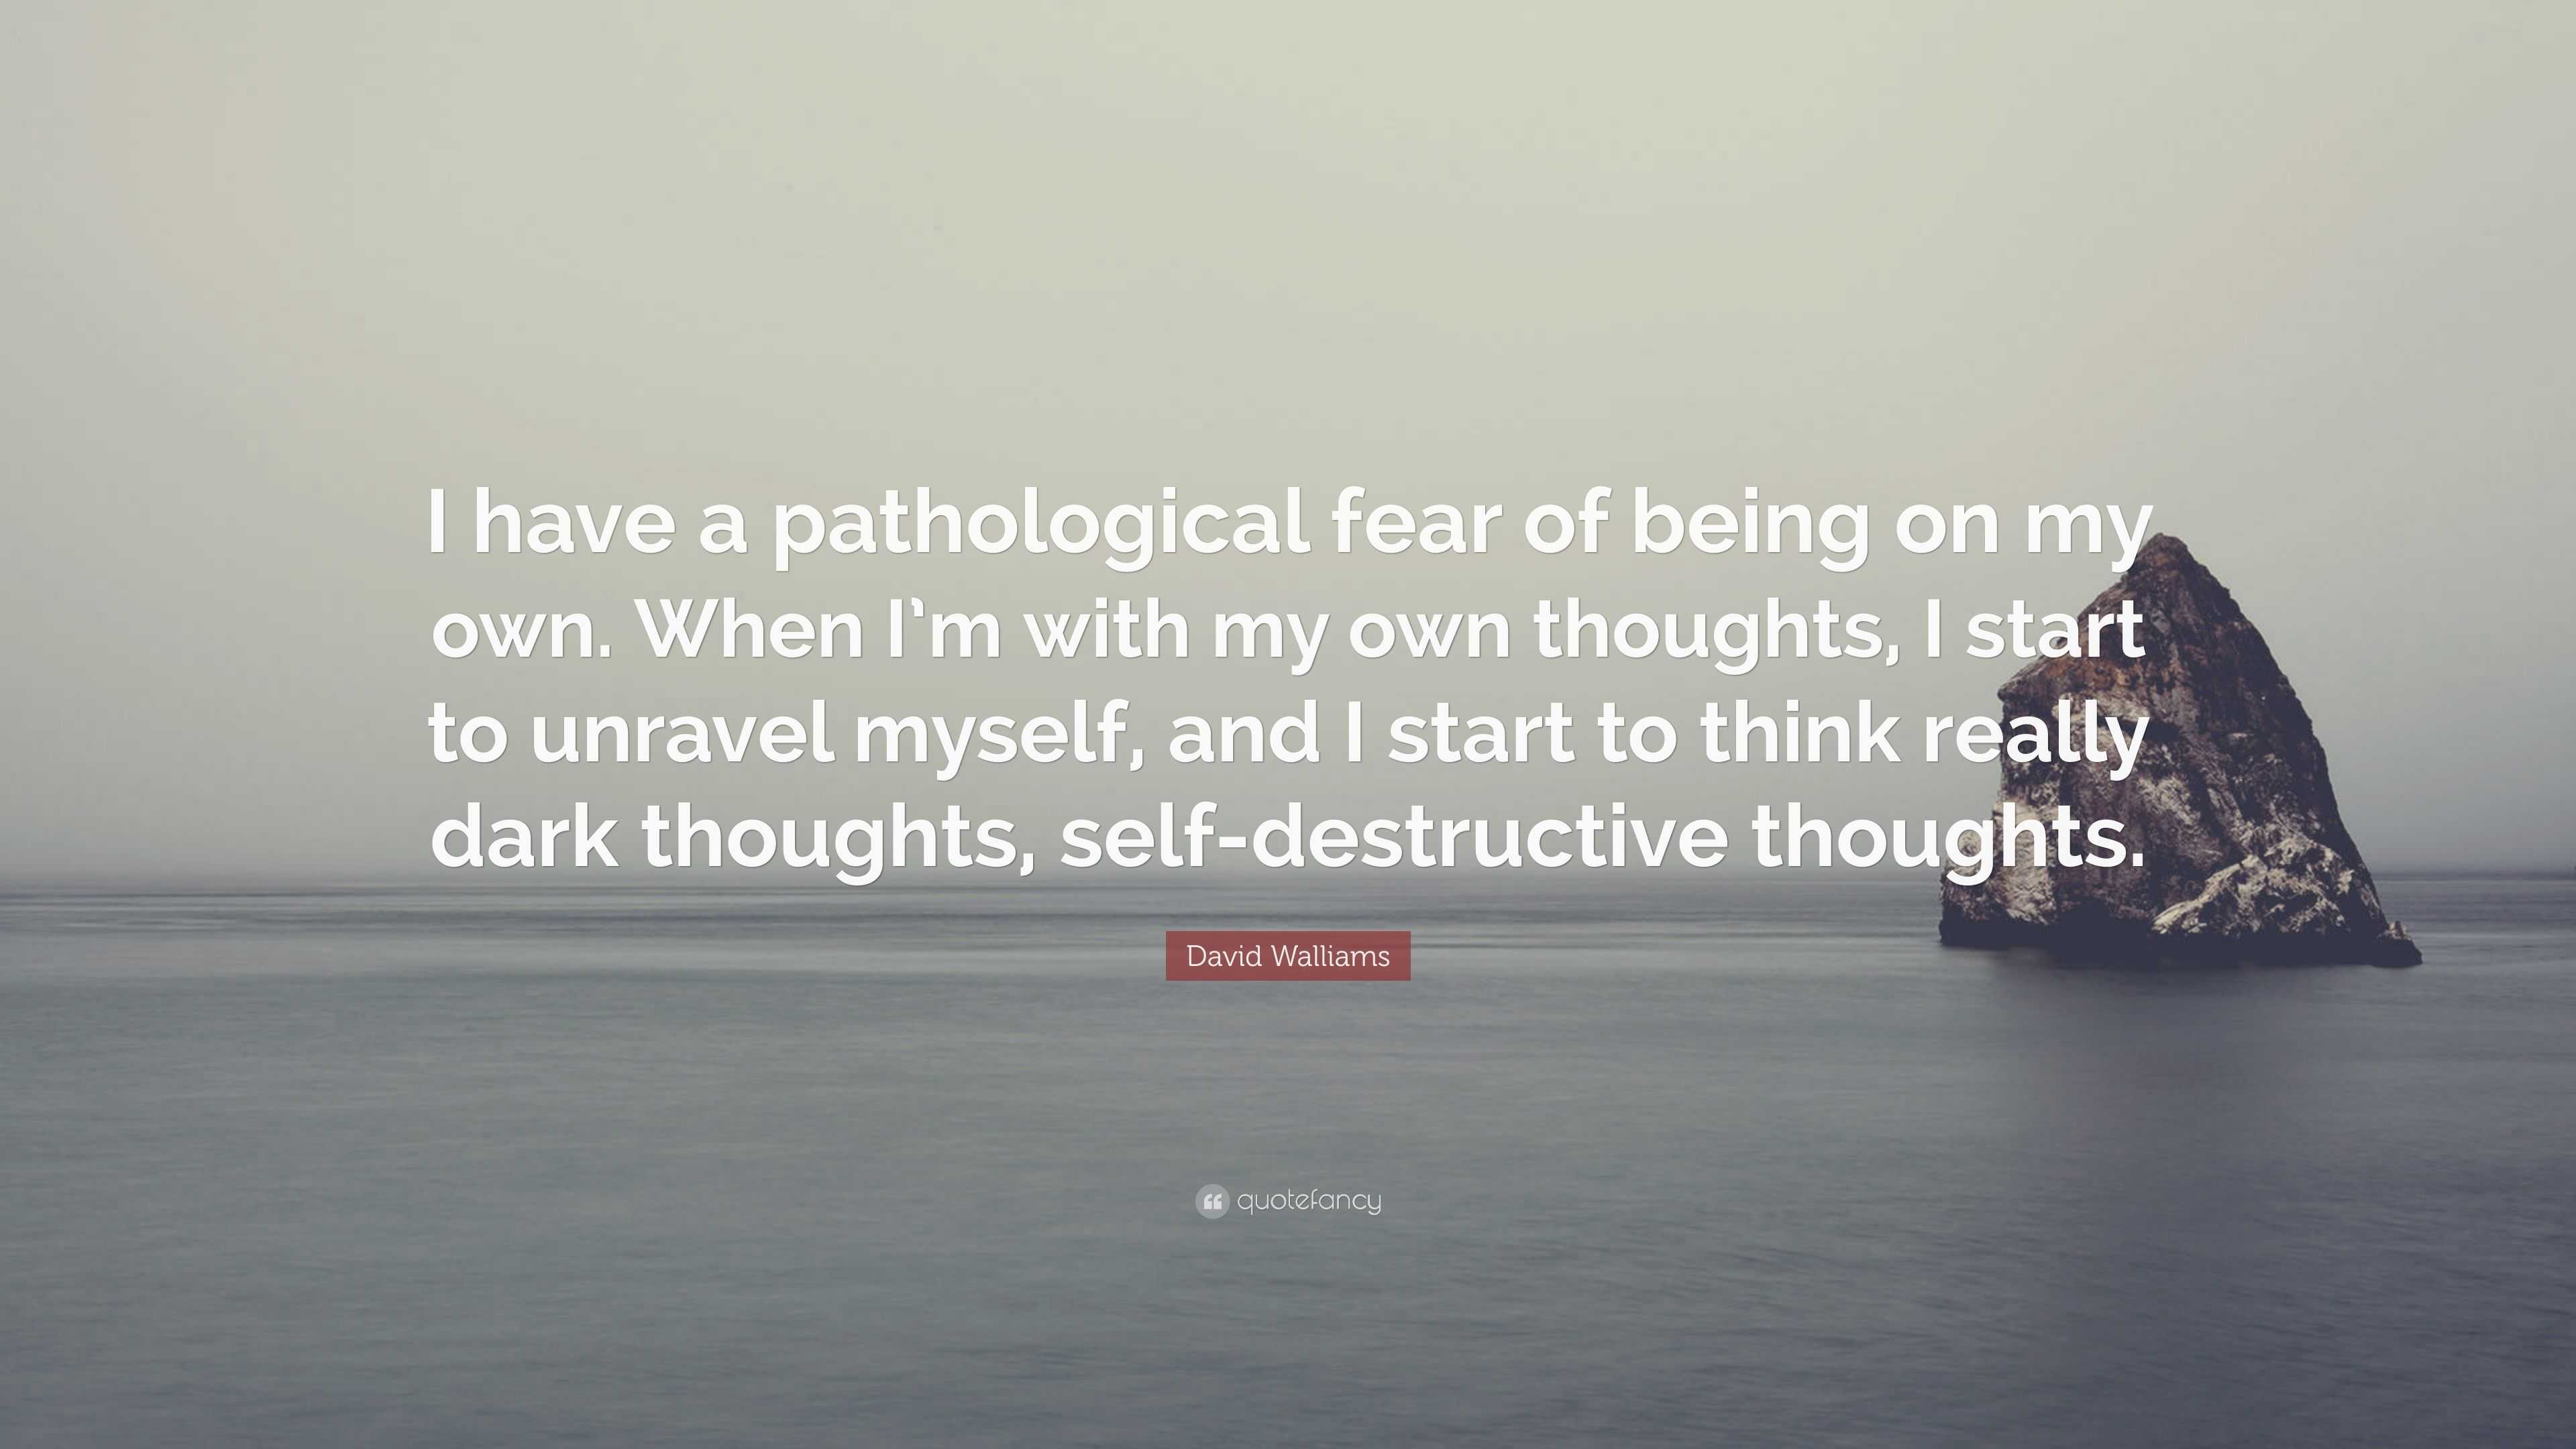 the definition of pathological fear